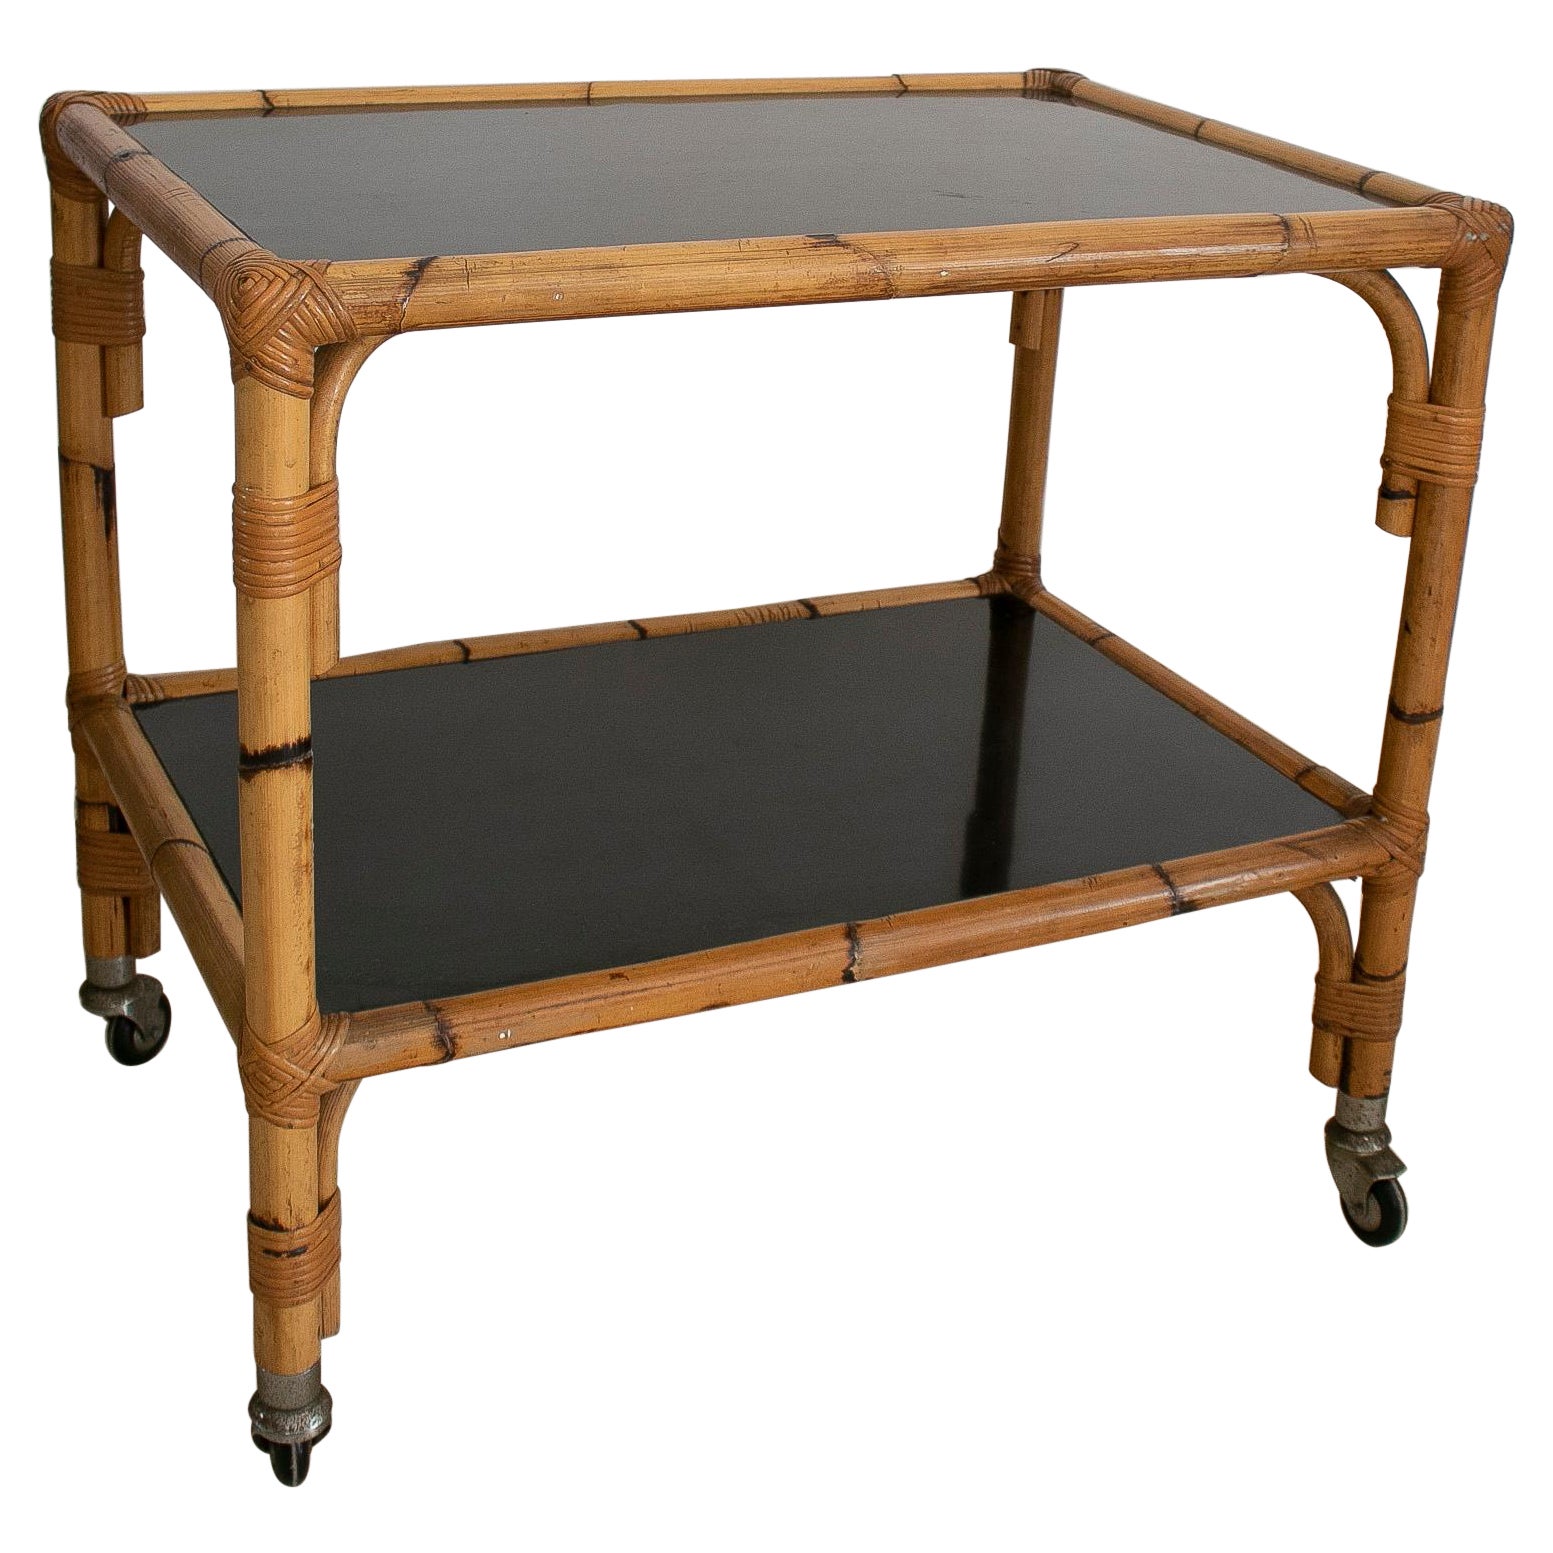 1970s Spanish Bamboo 2-Shelves Trolley w/ Smoked Glass Panels For Sale